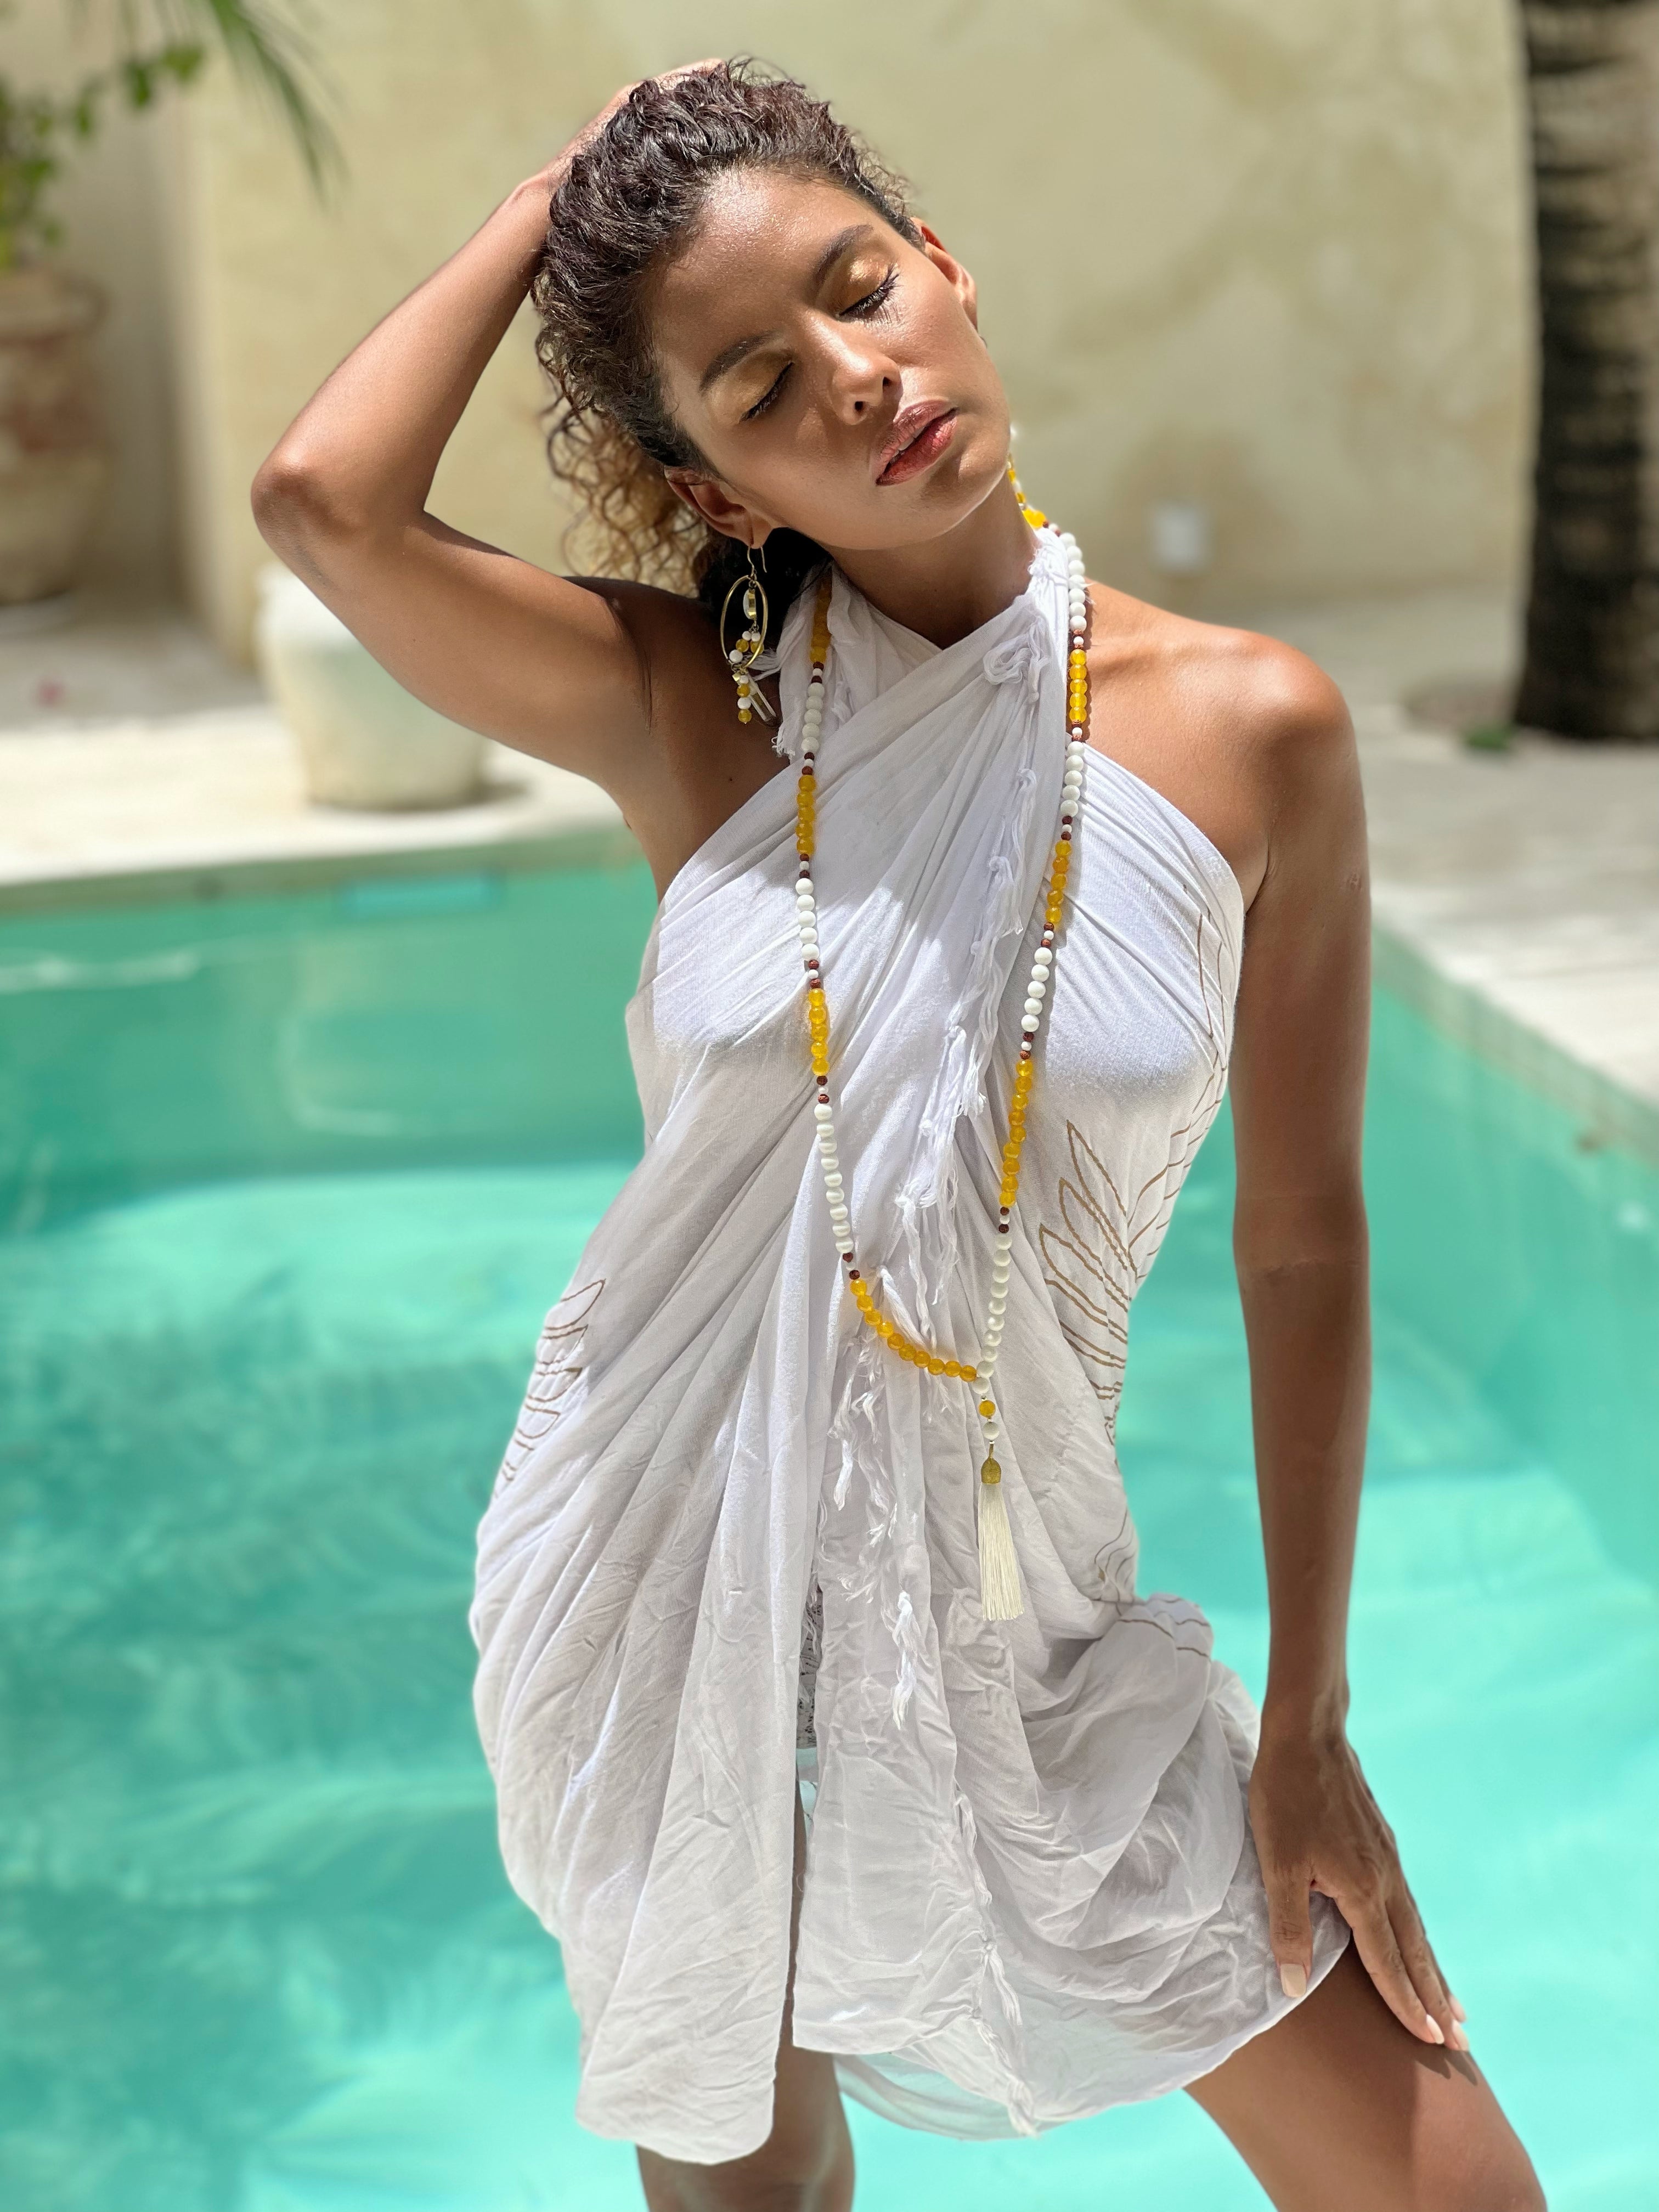 White and Gold Rise sarong cotton scarf or head band with divine mala neads necklace from unleash your inner wealth